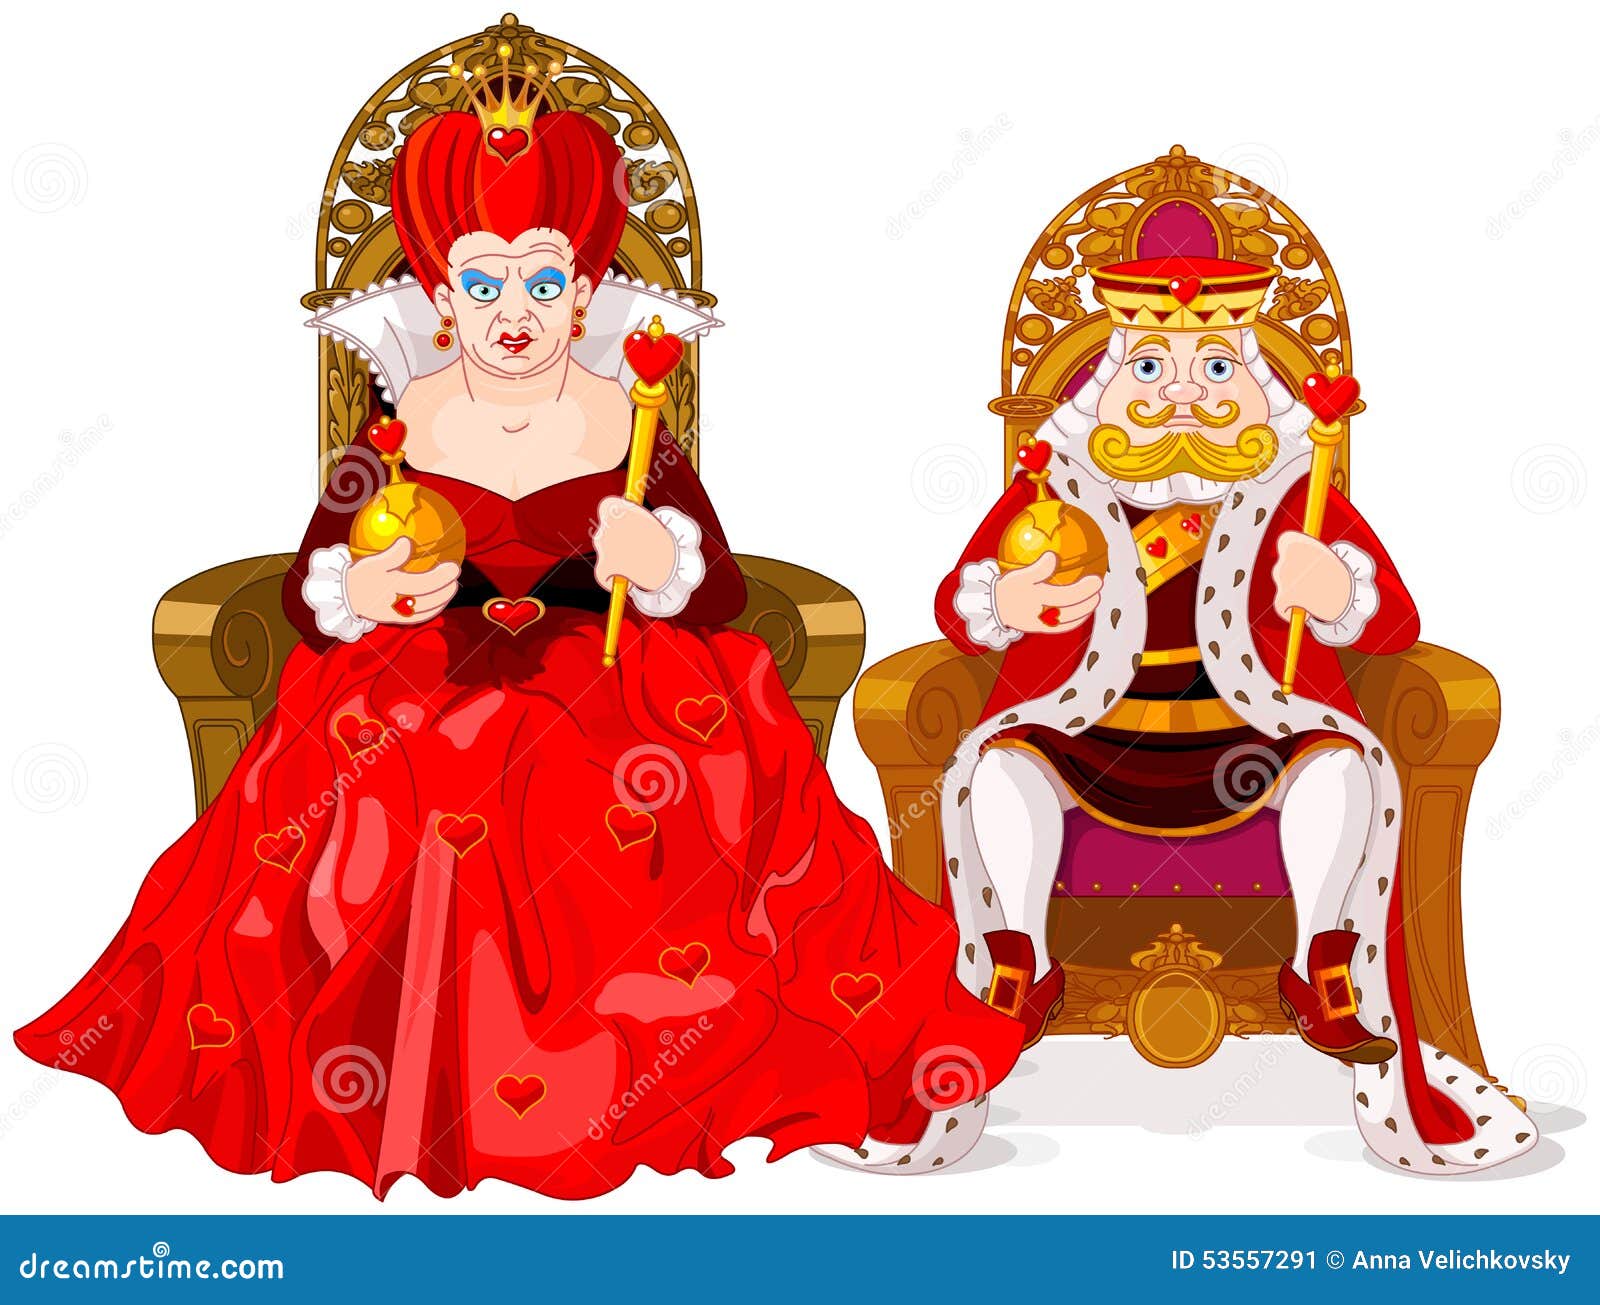 clipart king and queen - photo #50